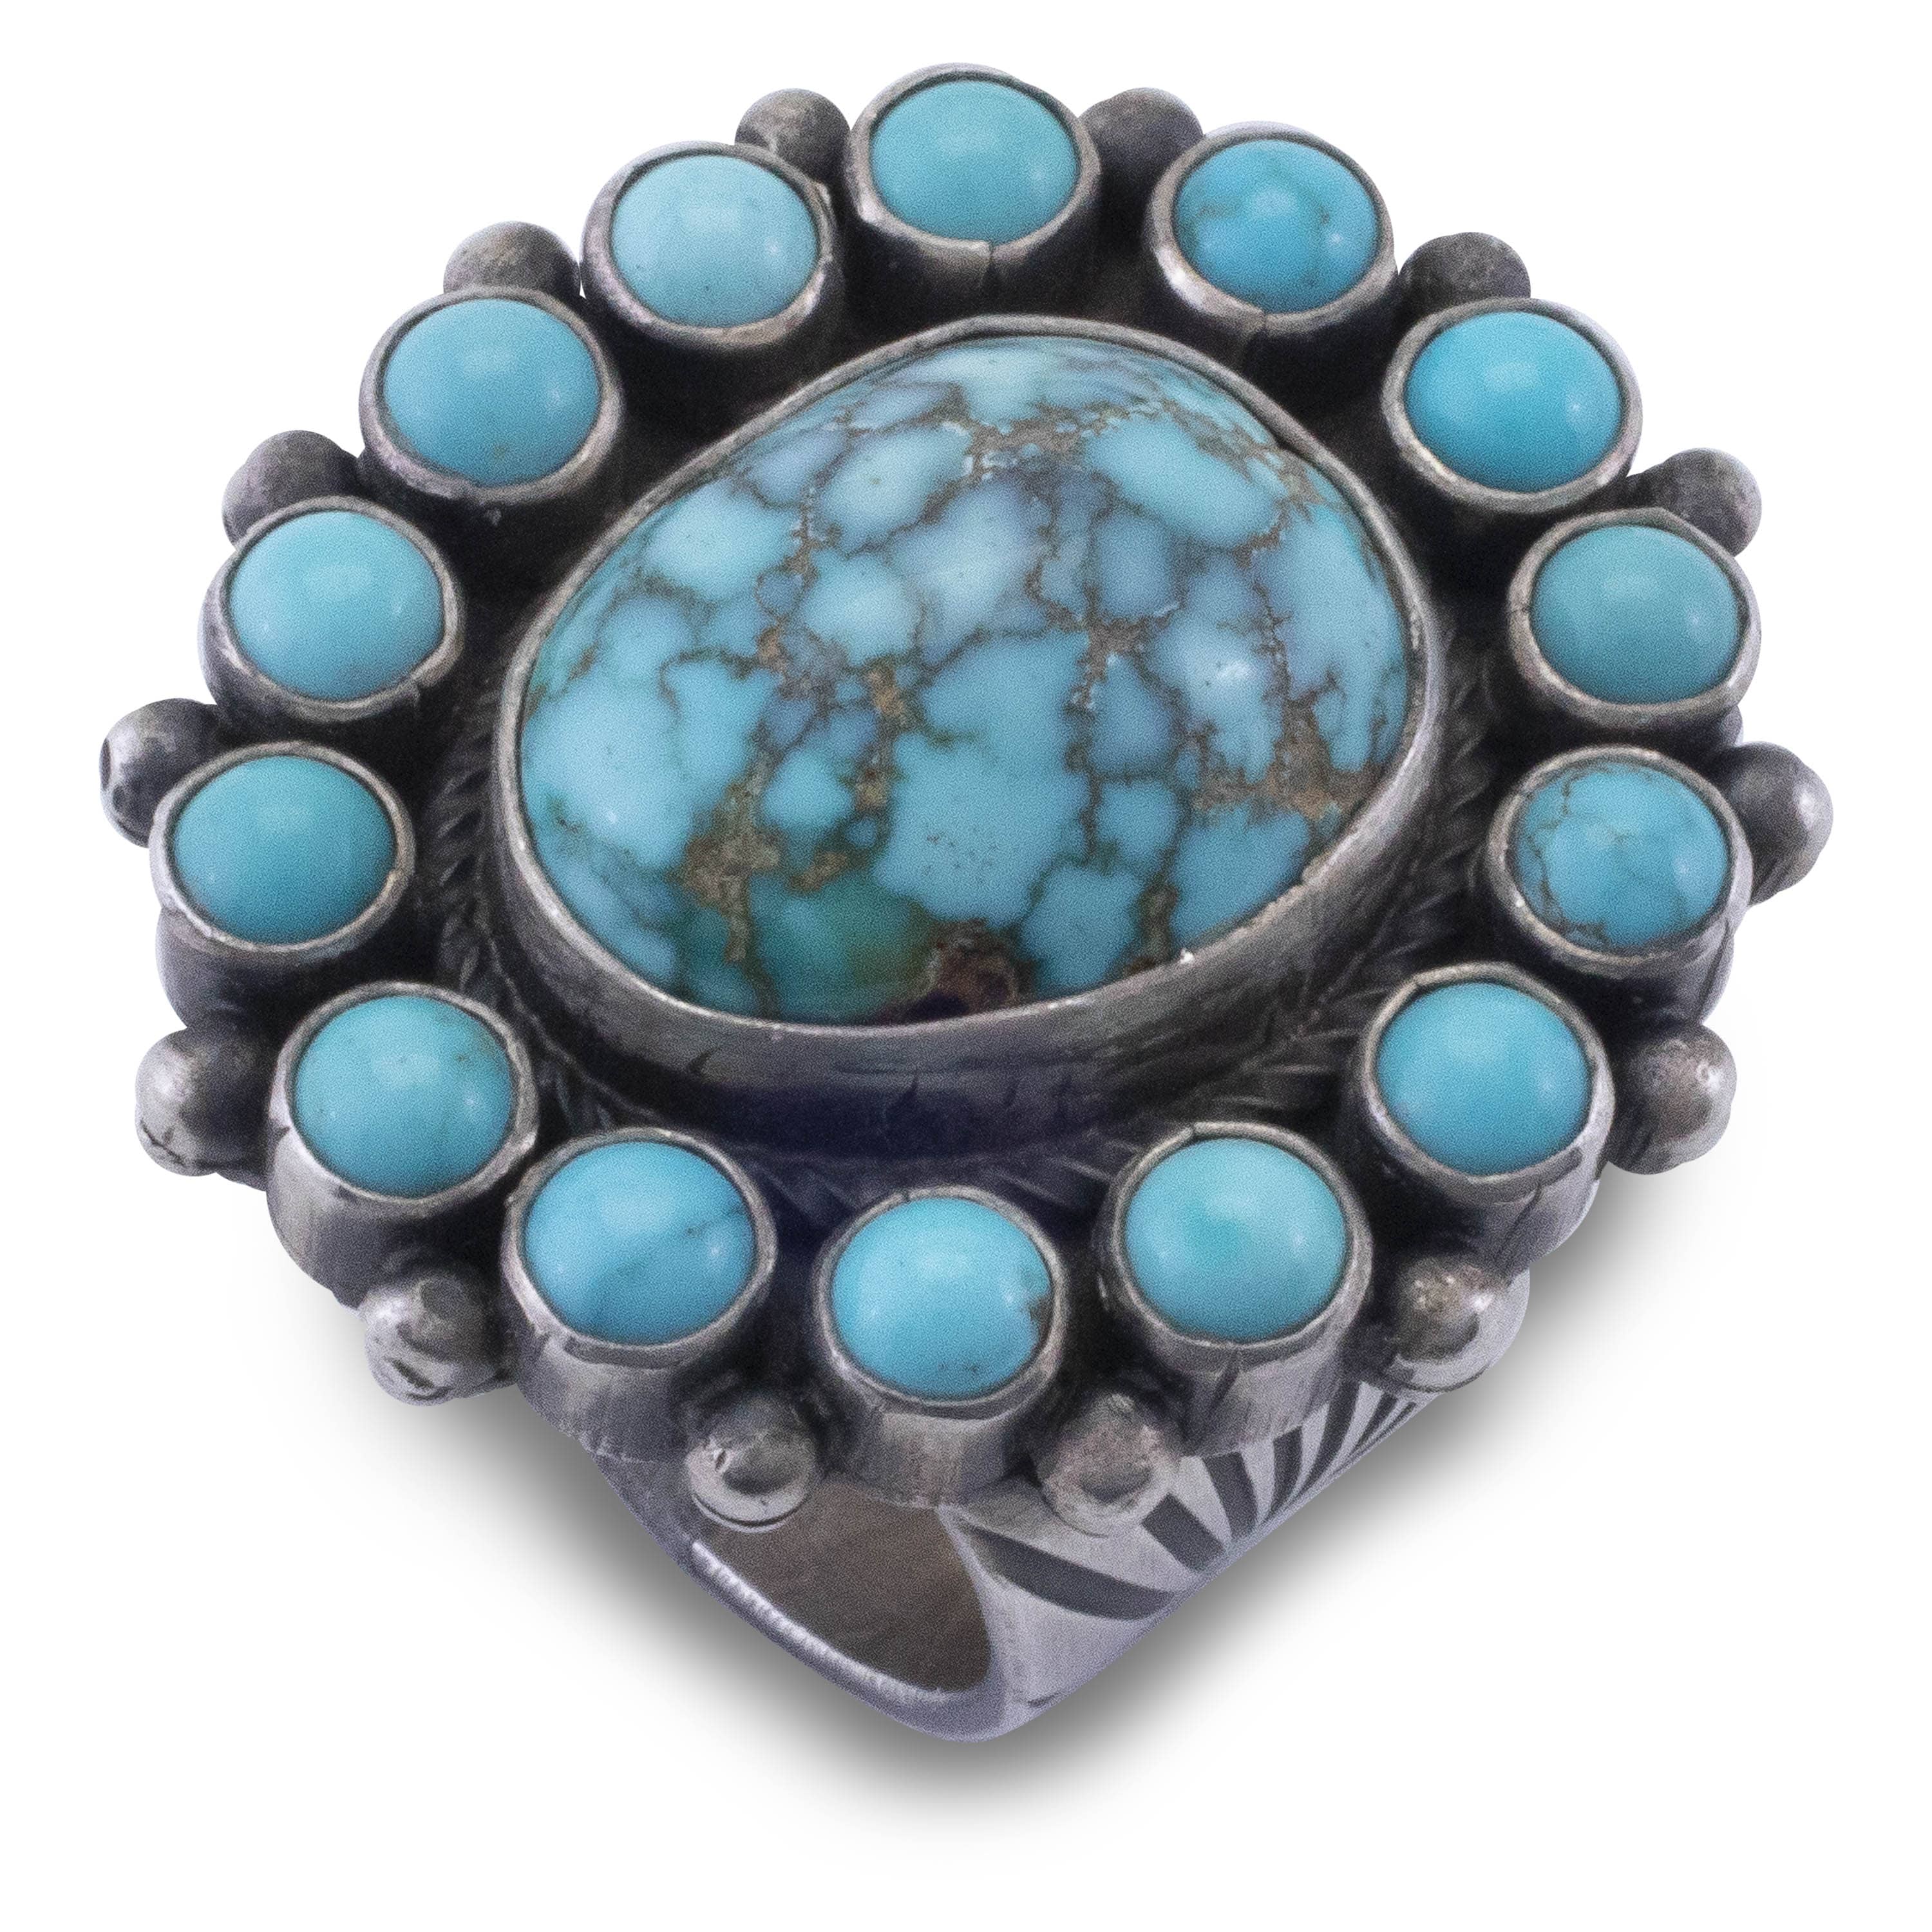 Kalifano Native American Jewelry 7 Paul Livingston Carico Lake Turquoise and Campitos Turquoise USA Native American Made 925 Sterling Silver Ring NAR2400.010.7